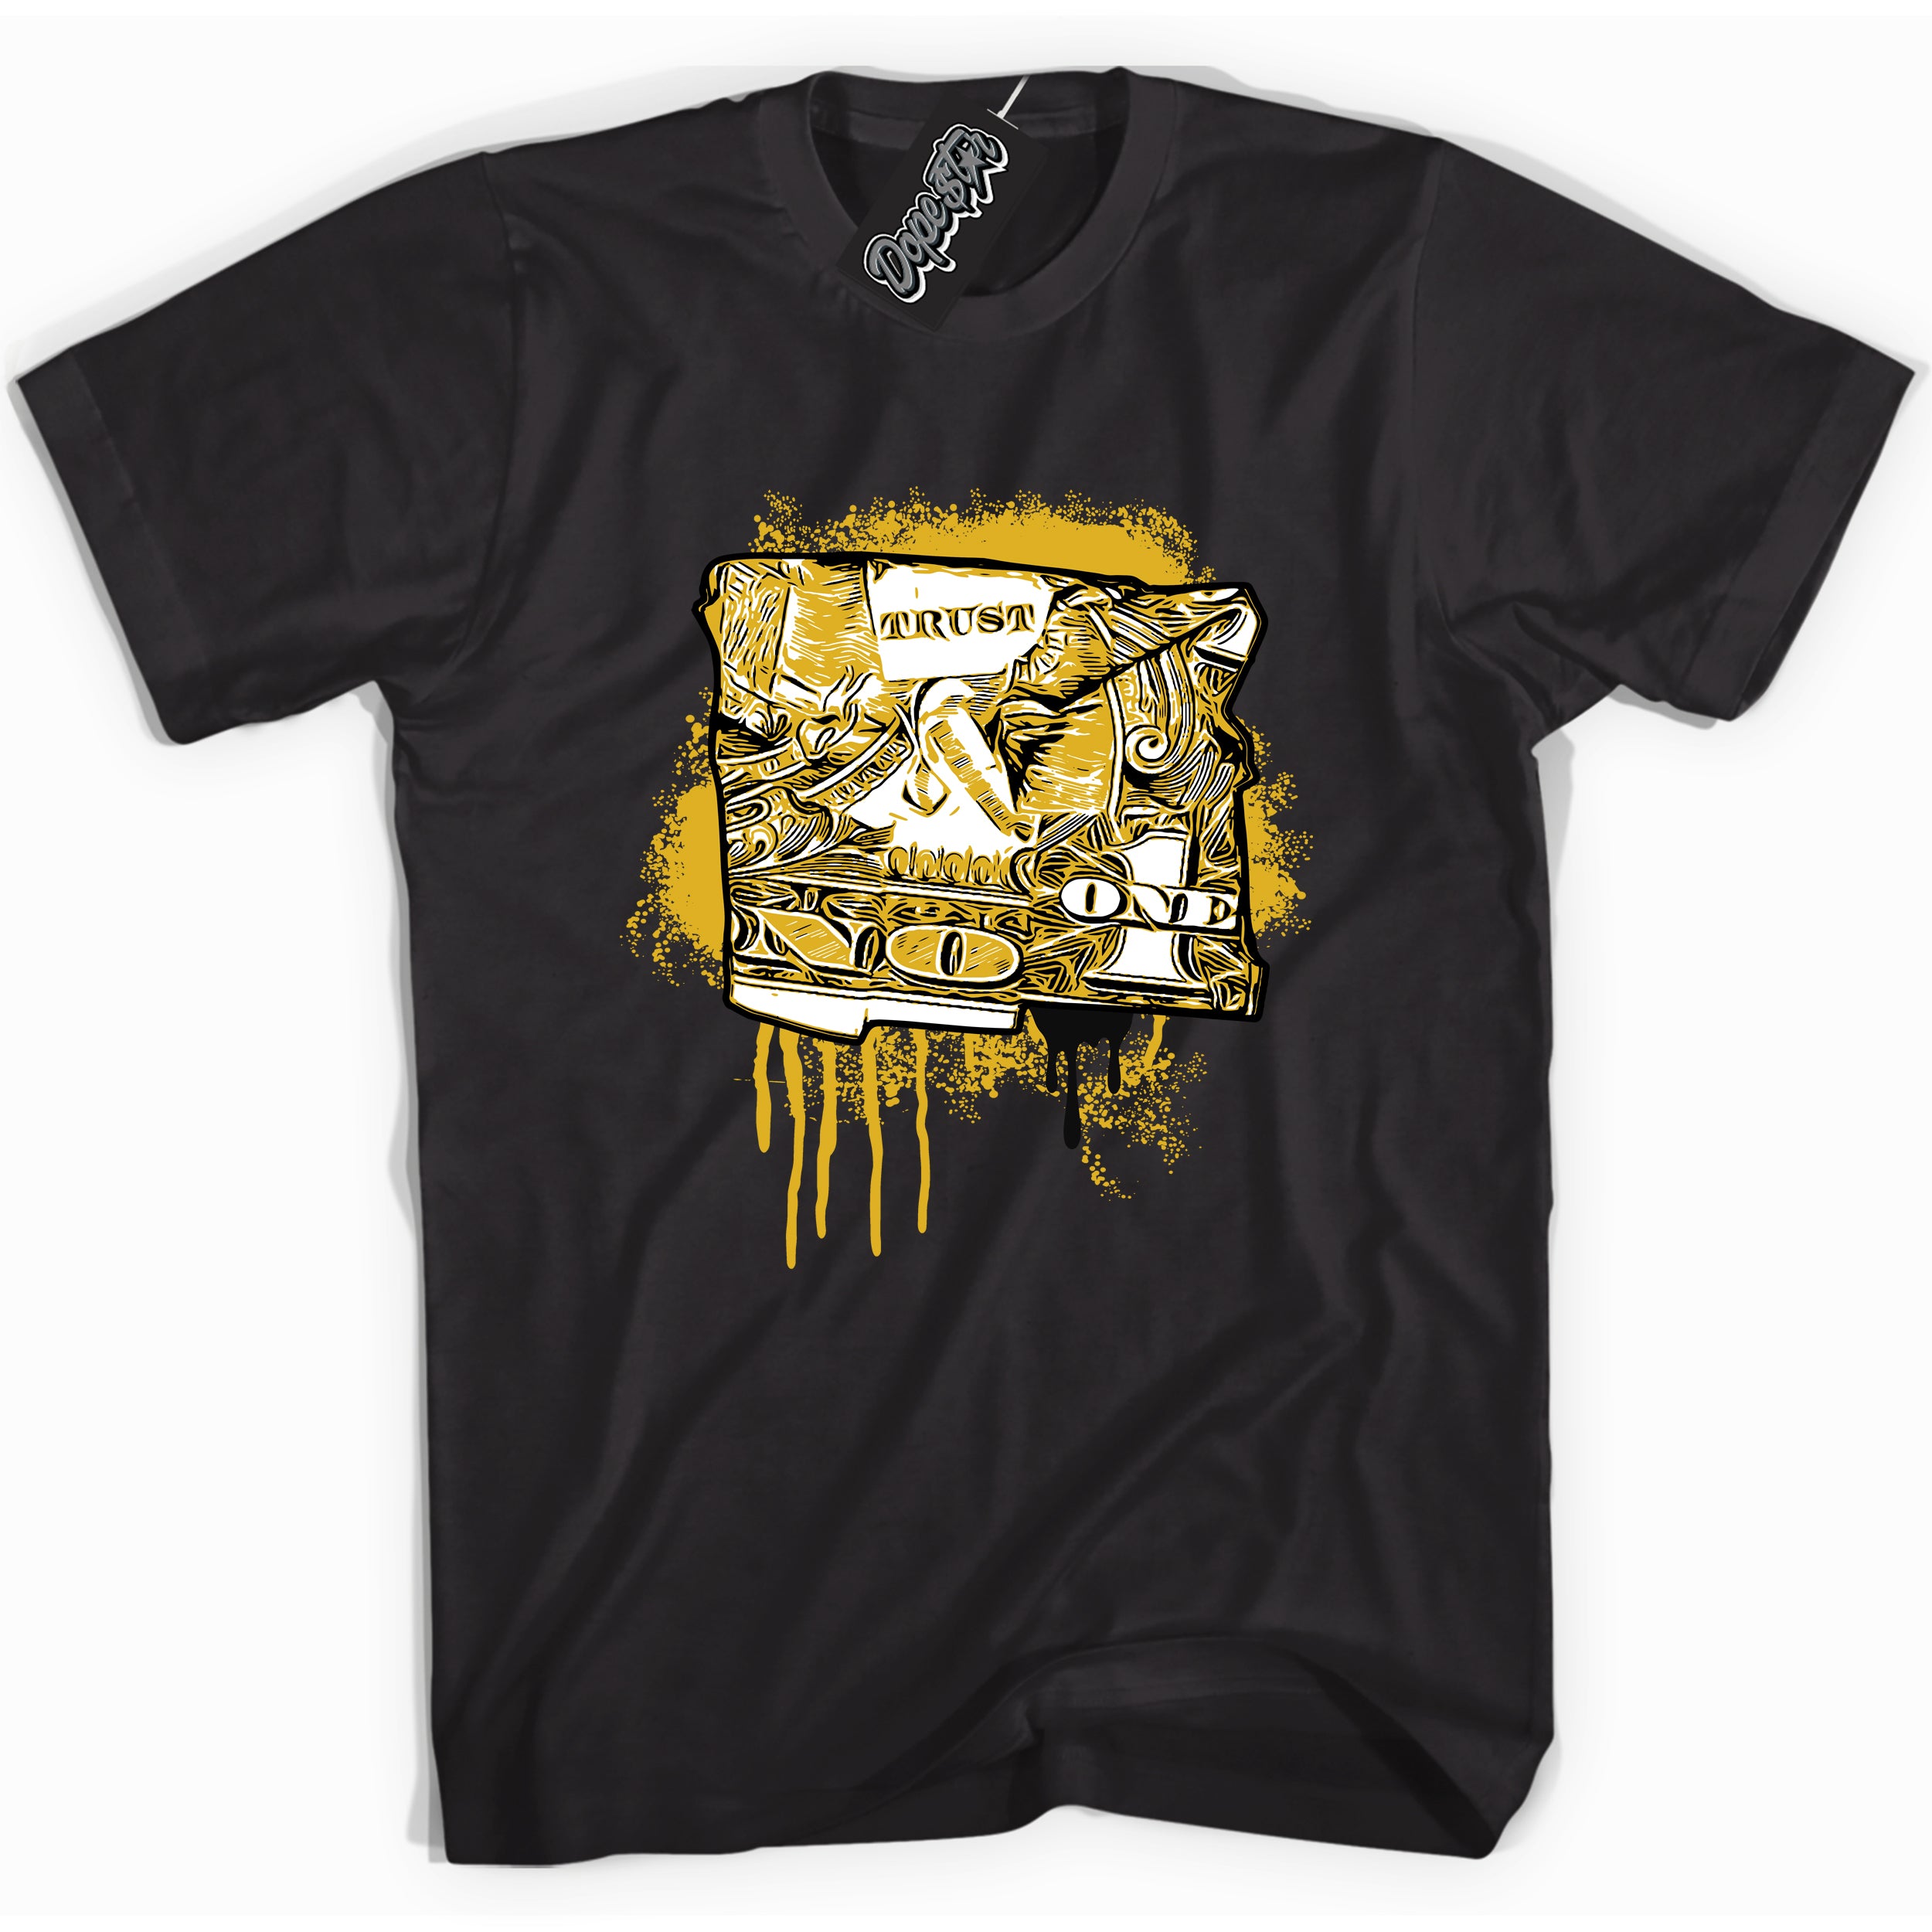 Cool black Shirt with “ Trust No One Dollar” design that perfectly matches Yellow Ochre 6s Sneakers.